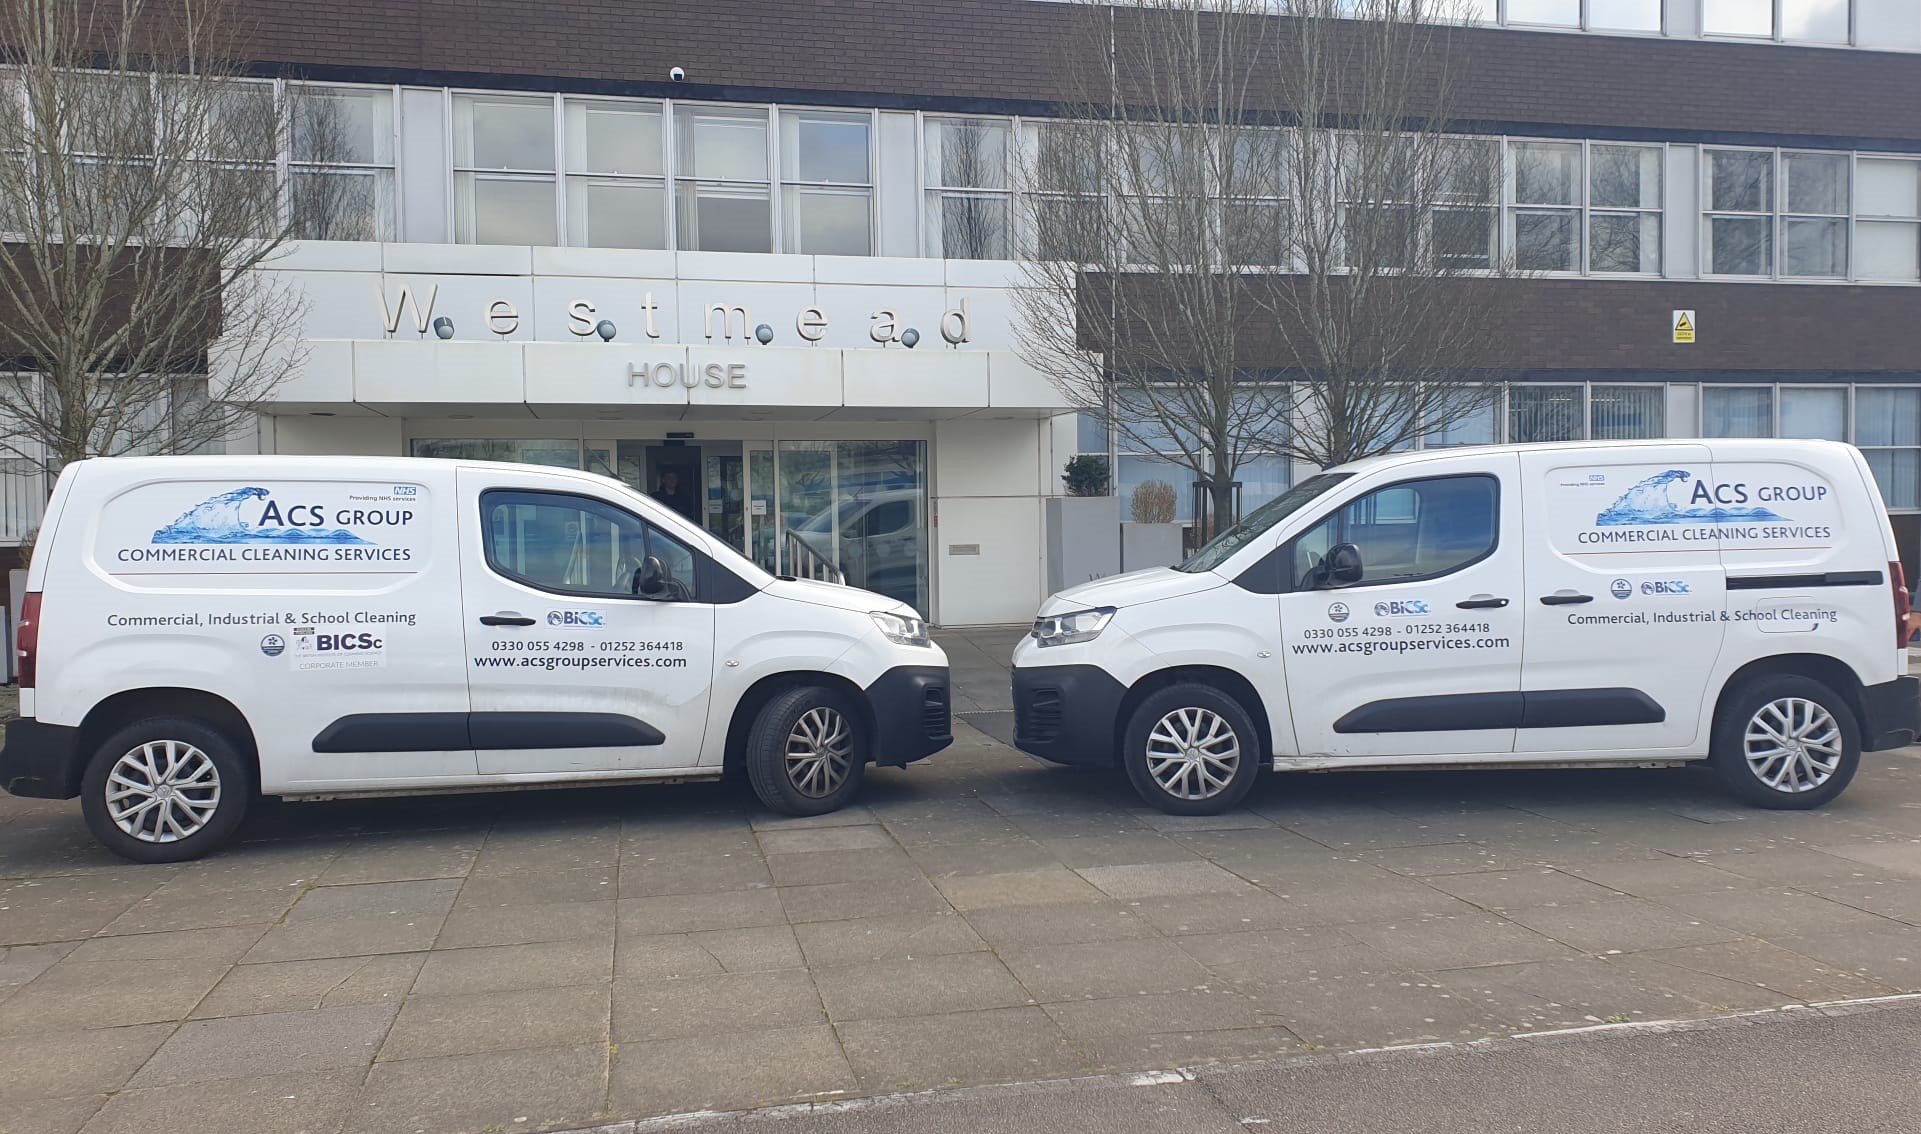 2 ACS group vans parked outside front office